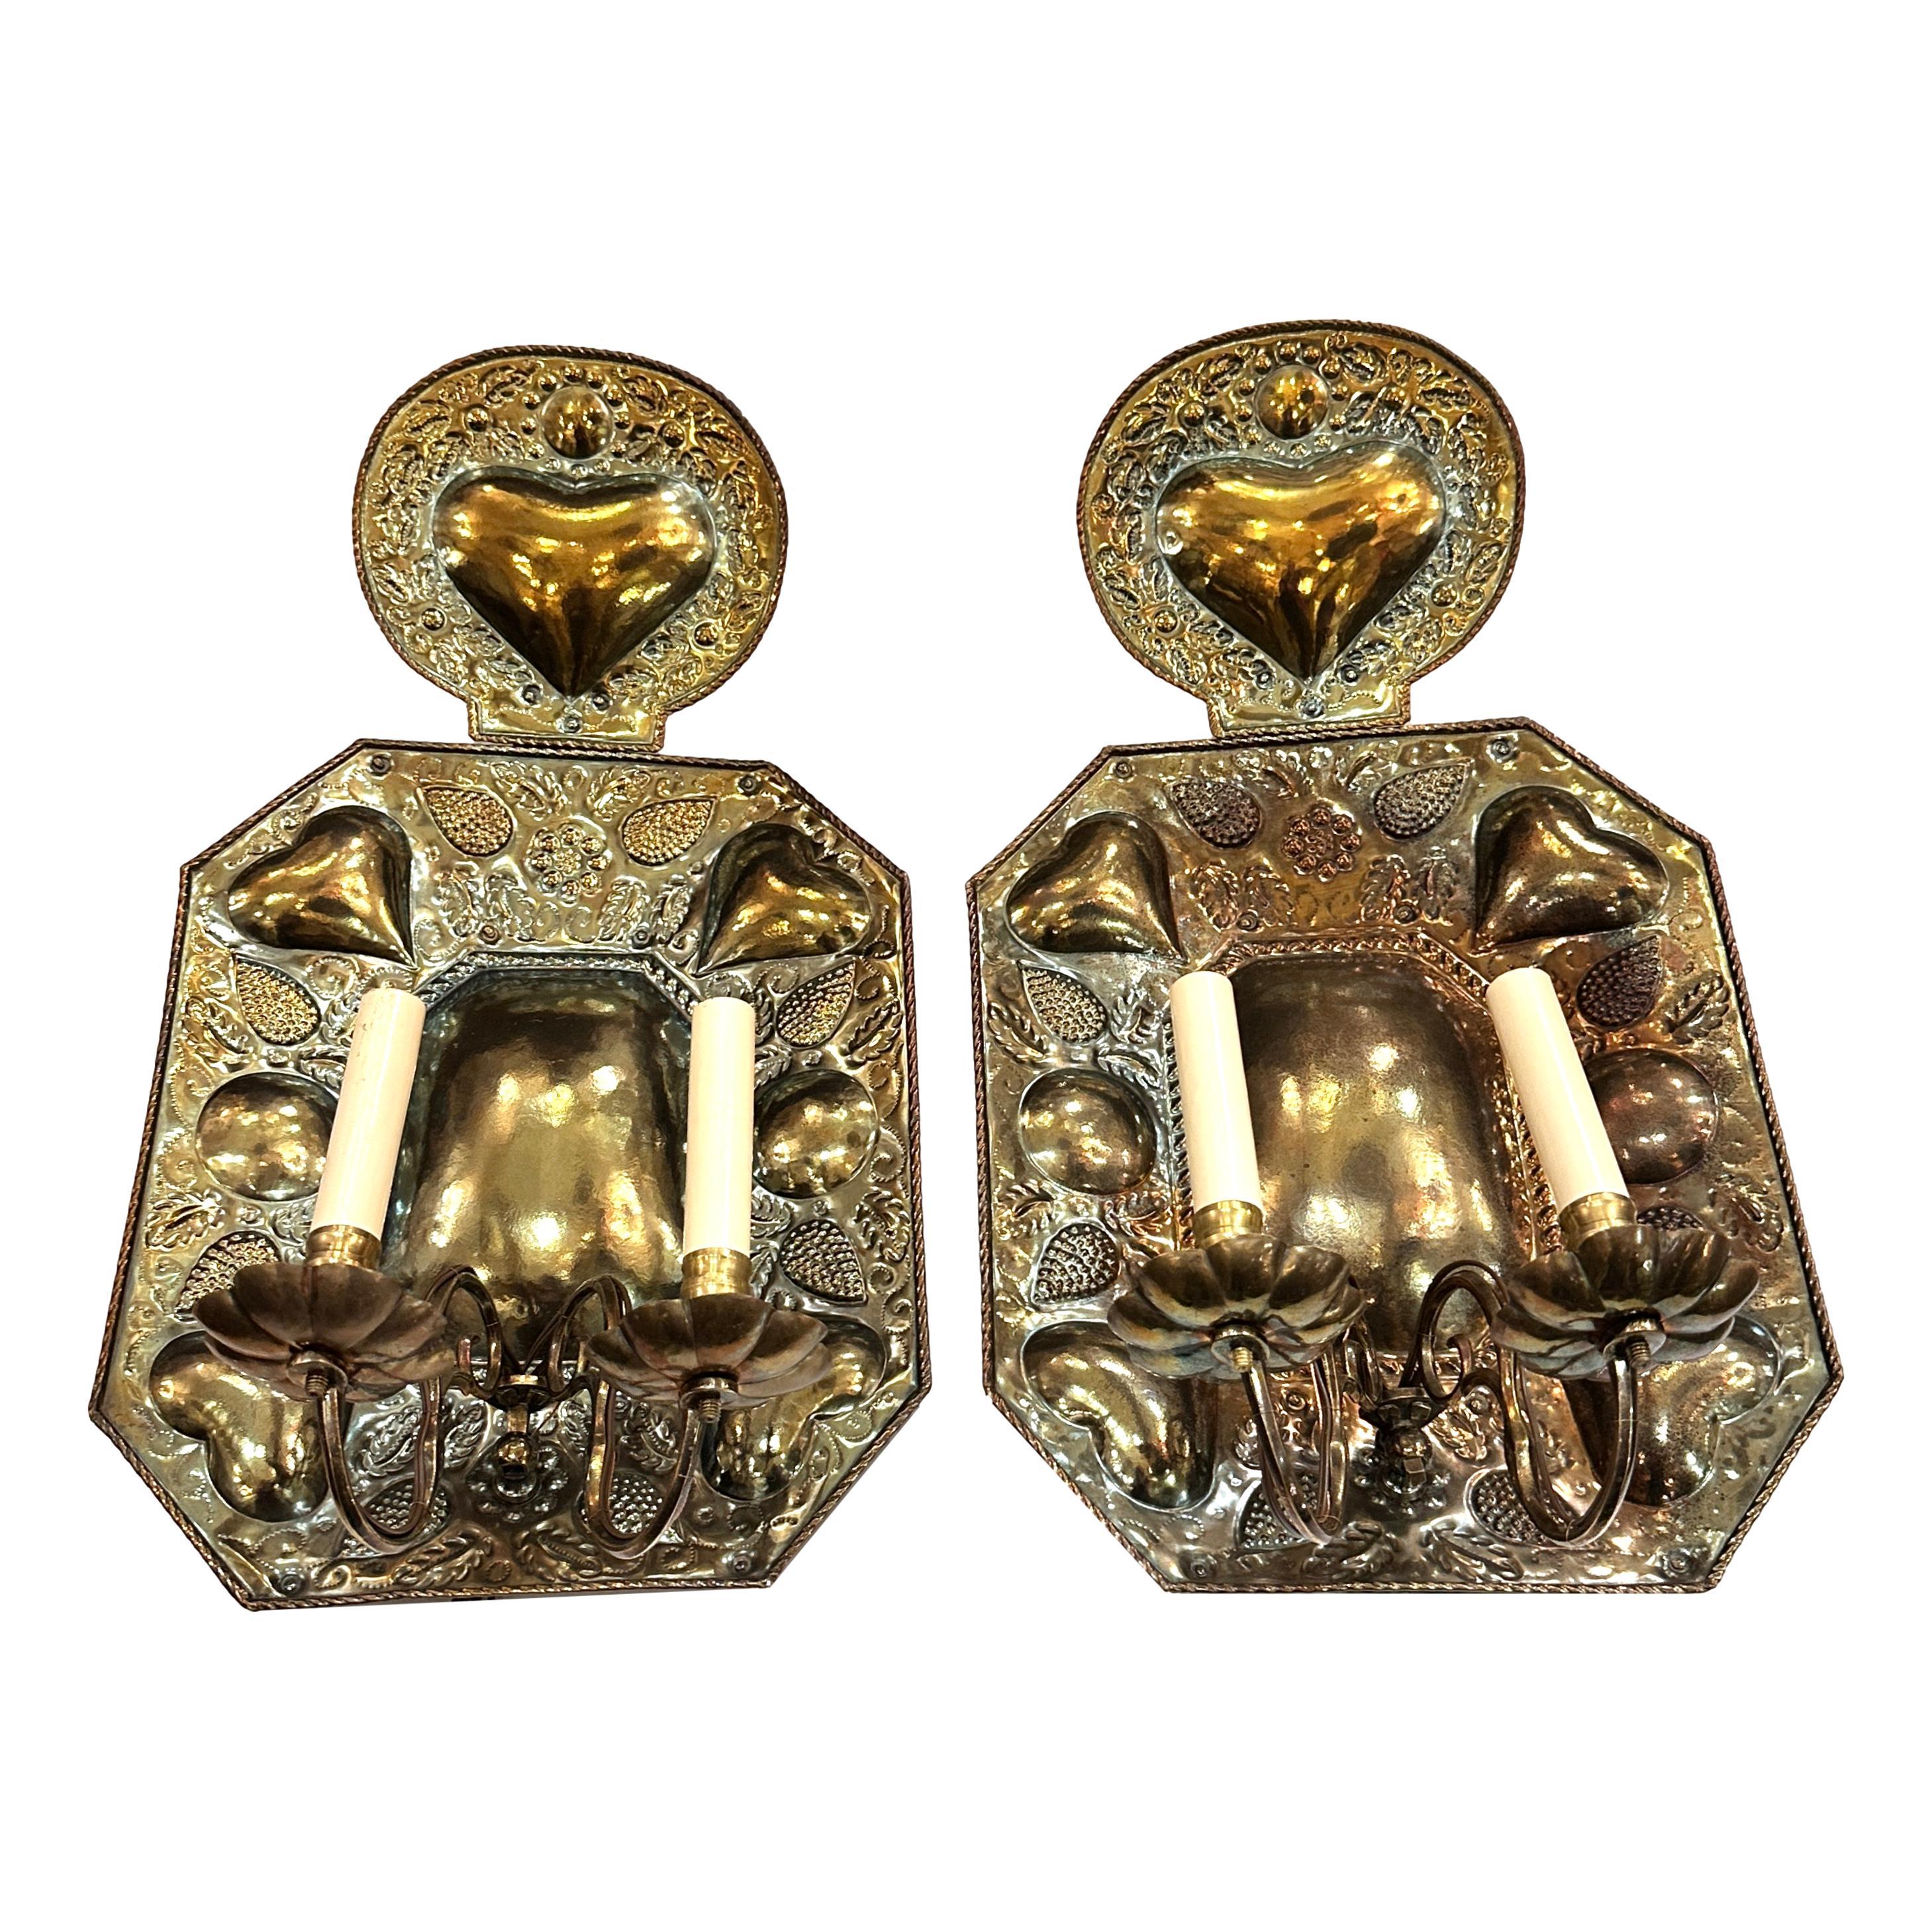 A pair of large circa 1920's English hammered sconces.

Measurements:
Height: 24